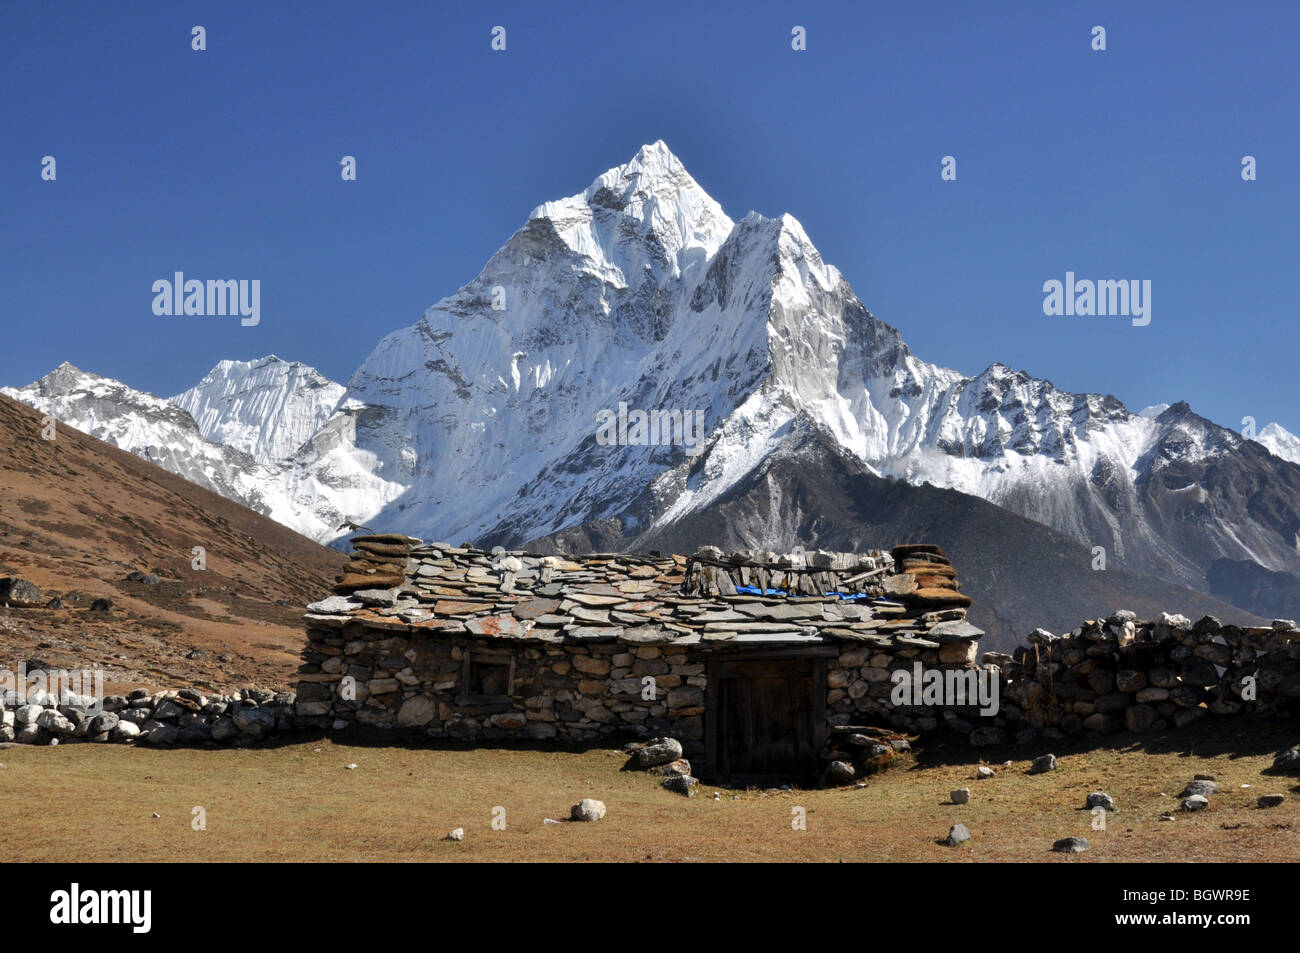 Himalayan mountain home in the shadow of a striking snow capped peak at moonrise Stock Photo